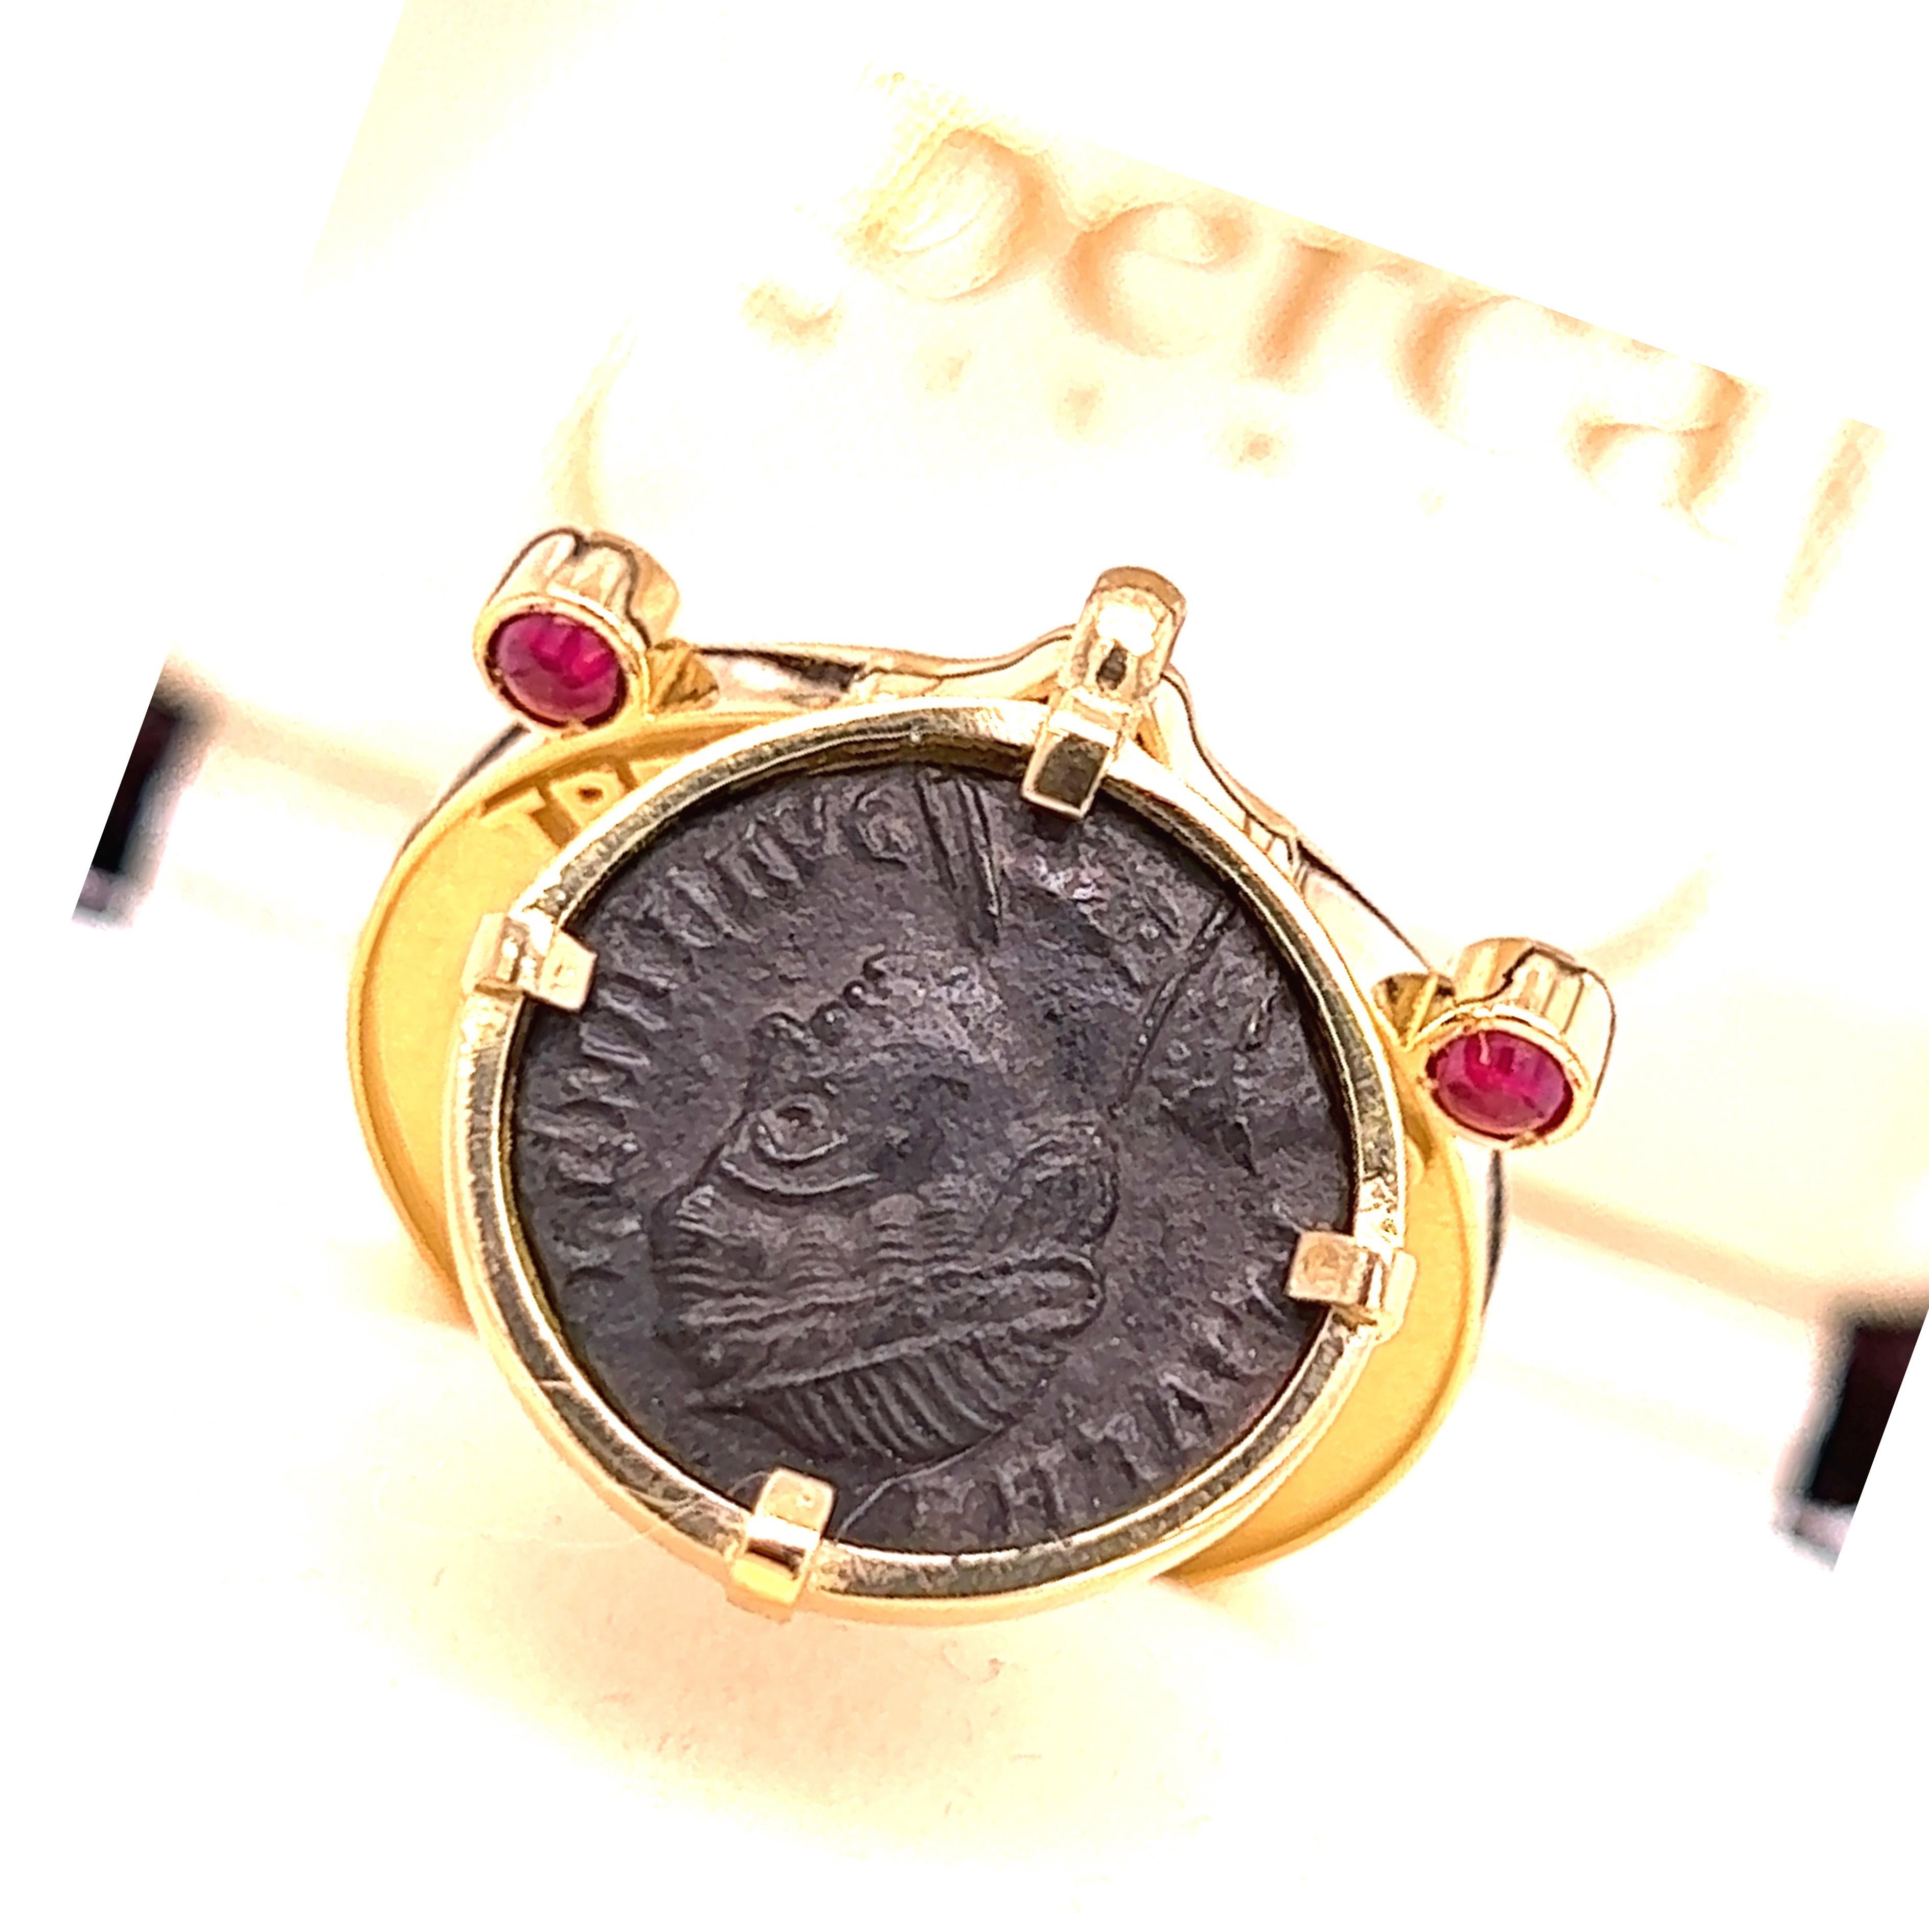 Berca Moruzzi Certified Helena's Head 337 A.D. Coin Ruby 18kt Gold Charm Ring For Sale 1